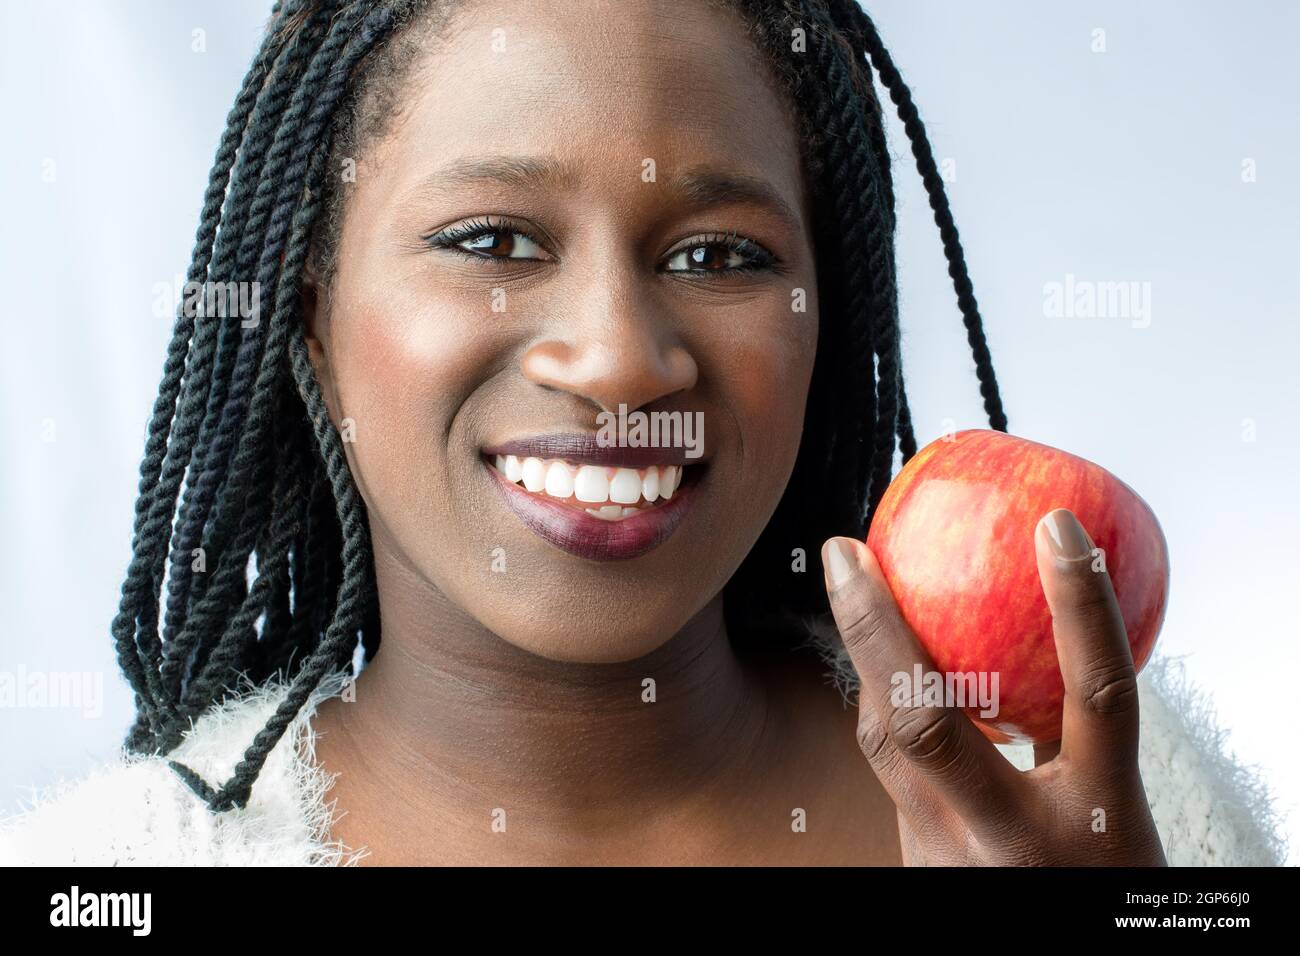 Macro close up of cute african teen with charming smile holding red apple.Isolated on light background. Stock Photo